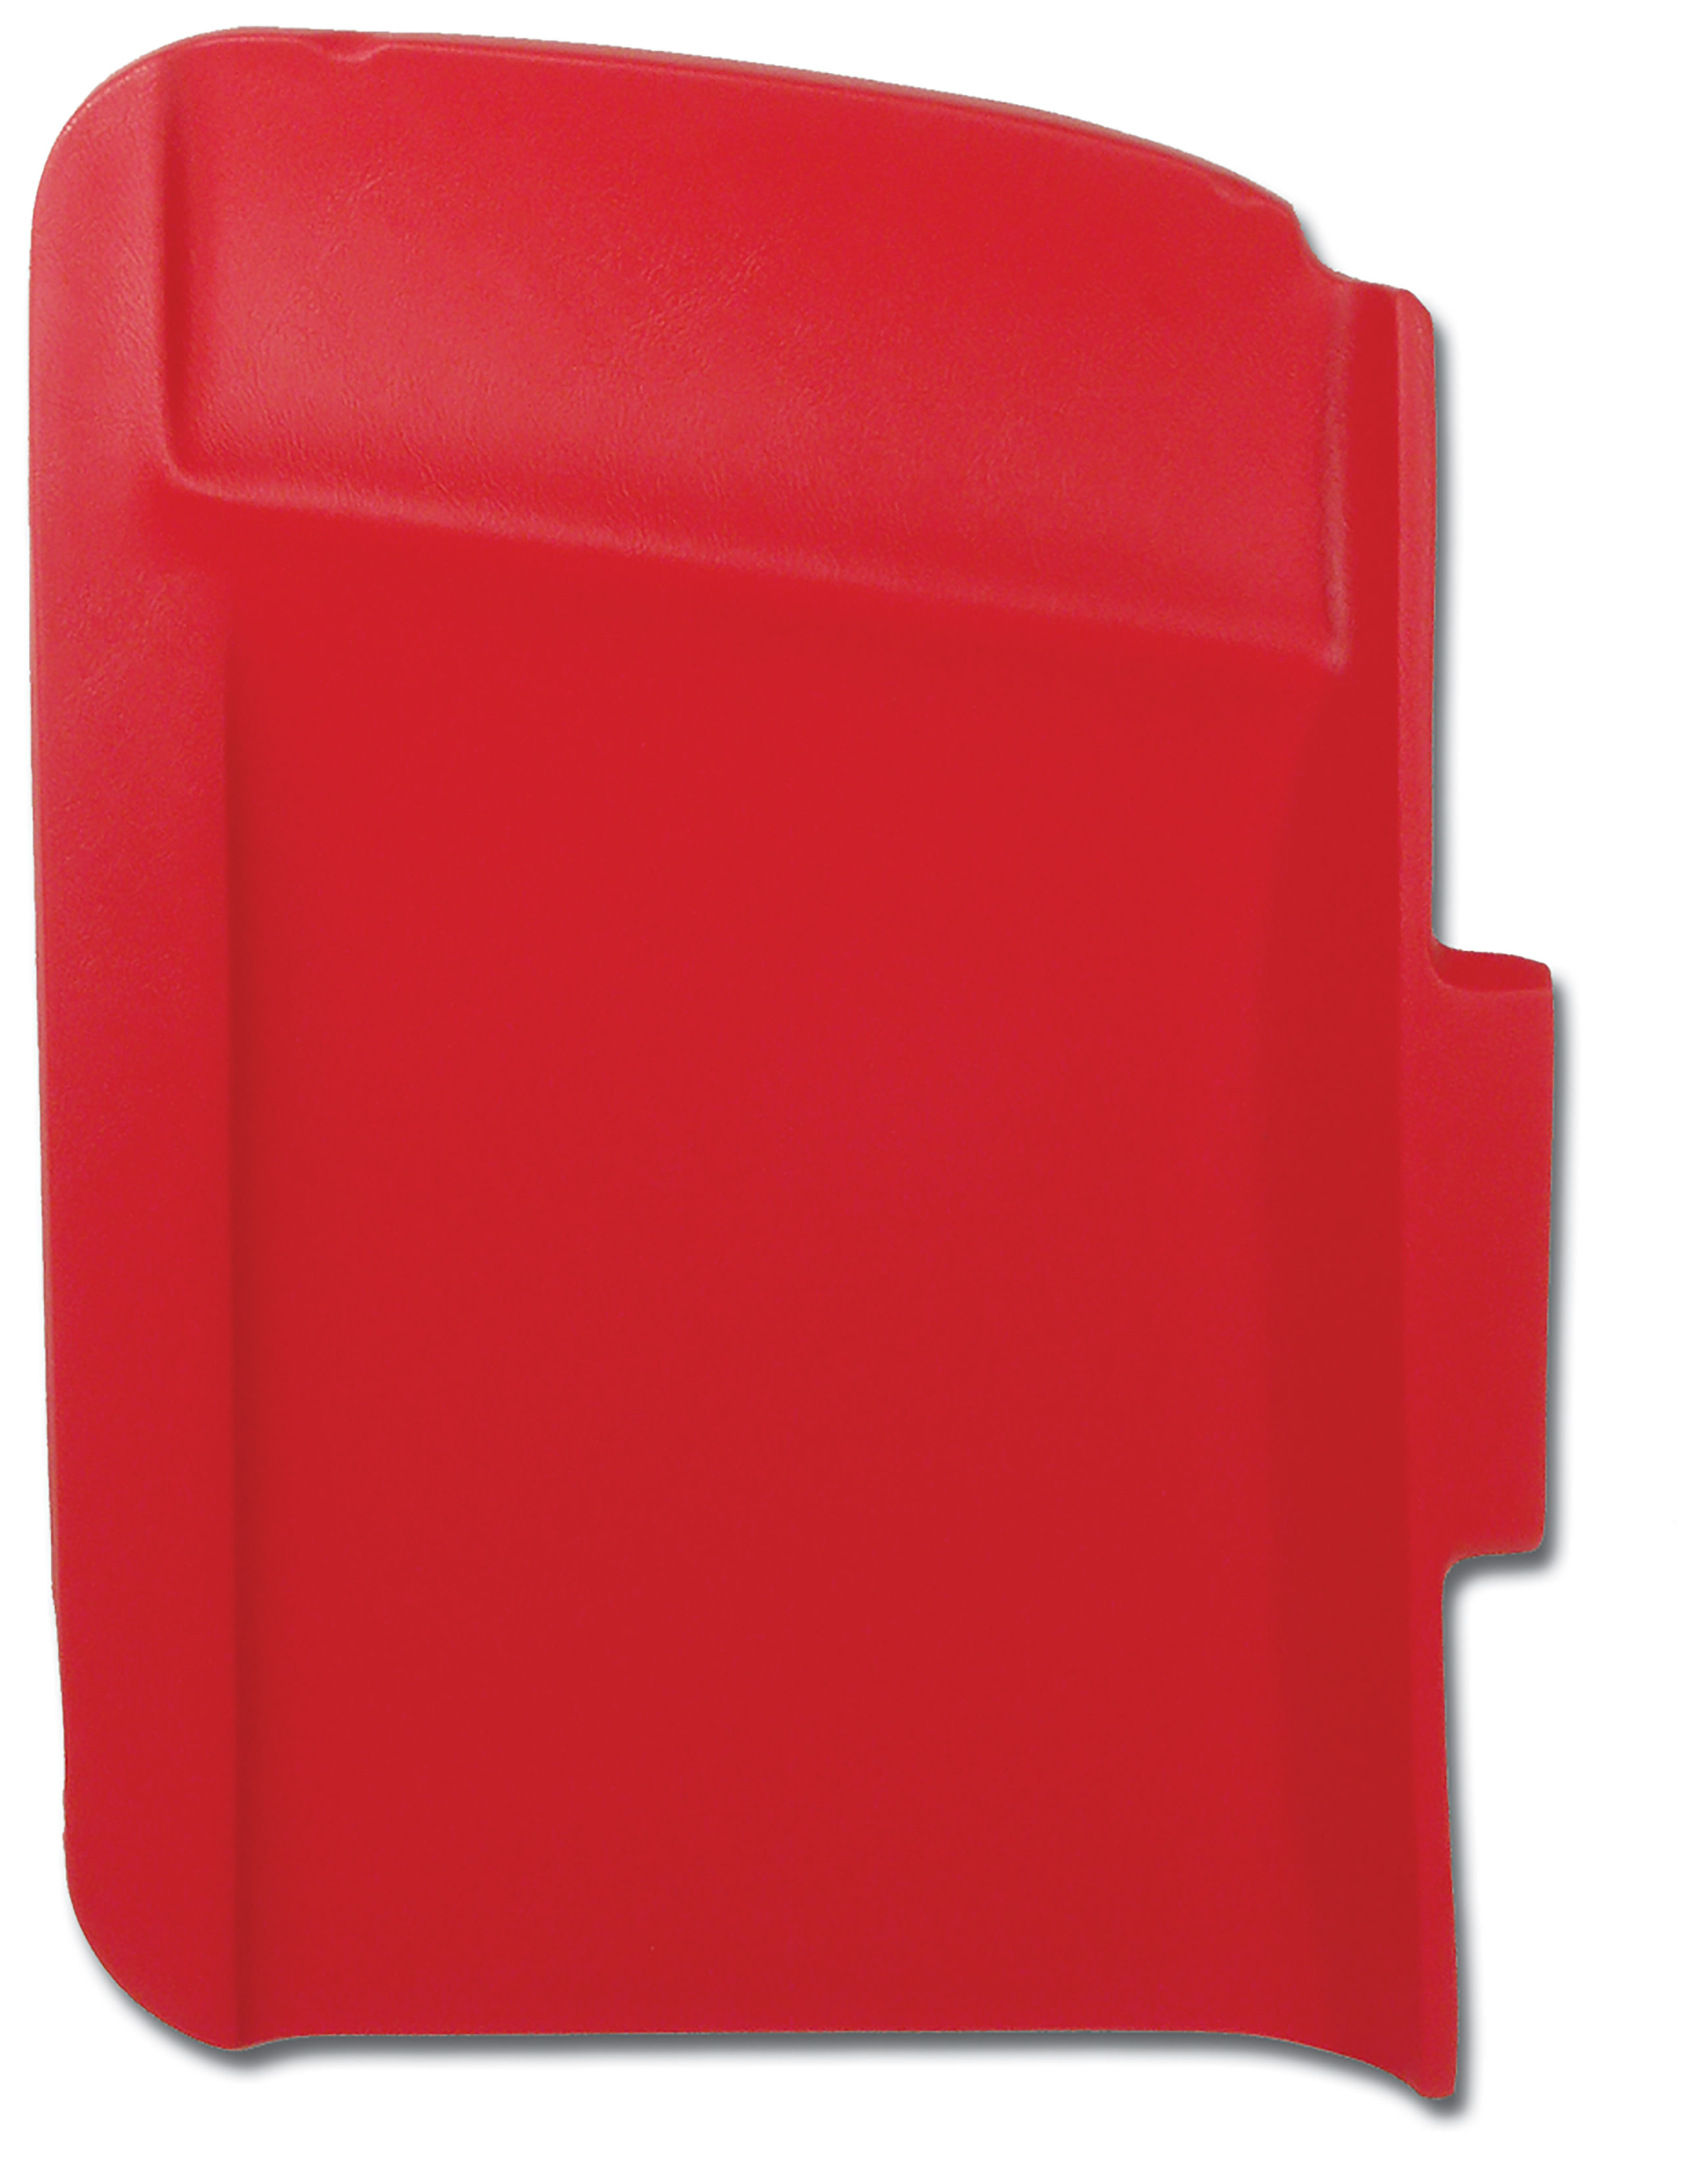 T-Top Pad- Red LH For 1968-1972 Corvette